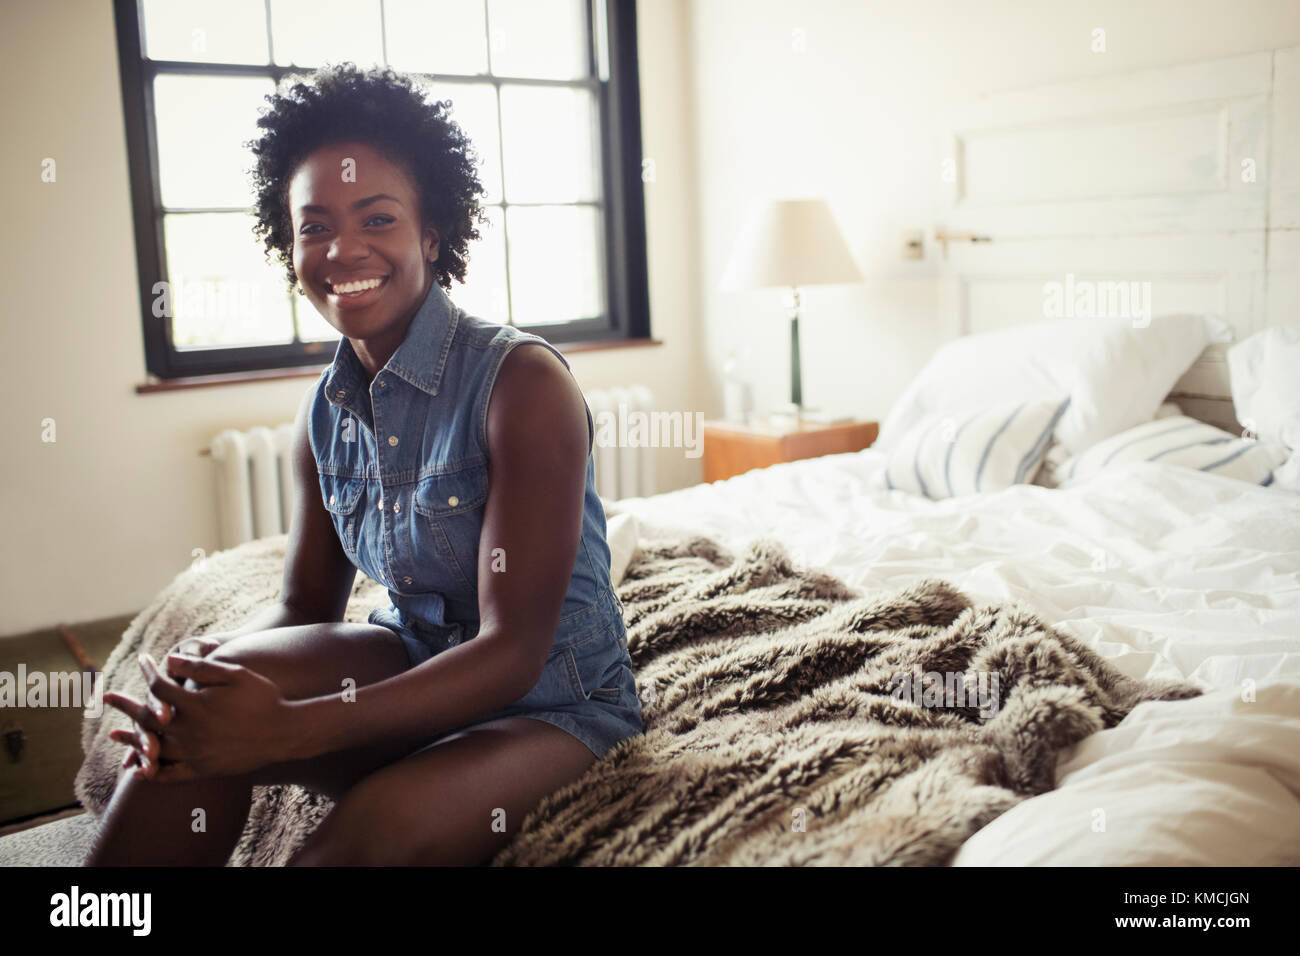 Portrait smiling, confident woman sitting on bed Stock Photo